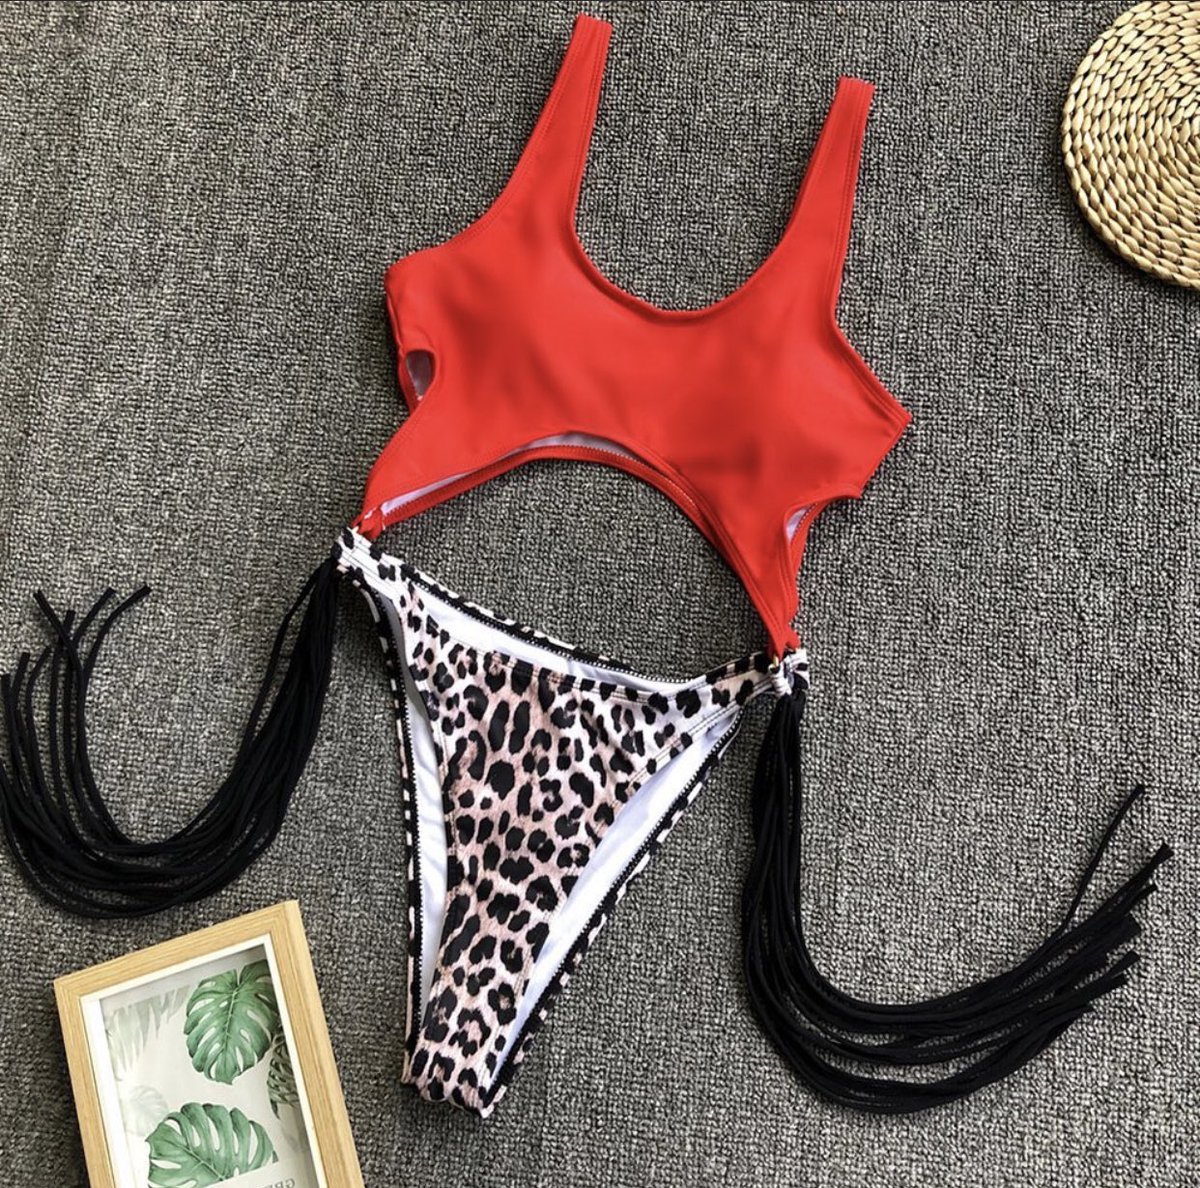 Are you dipped in Hunny? 
Get the look :  Worth the Wild at Hunny Kouture

Follow us on FB & IG : @hunnykouture 👙🍯 #swimwear #swimsuitseason #summertimefine #bold #bright #colorfulswimwear  #swimwear #HunnyKouture #bikinijunkie #trendy #sexy #summervibes #beachvi